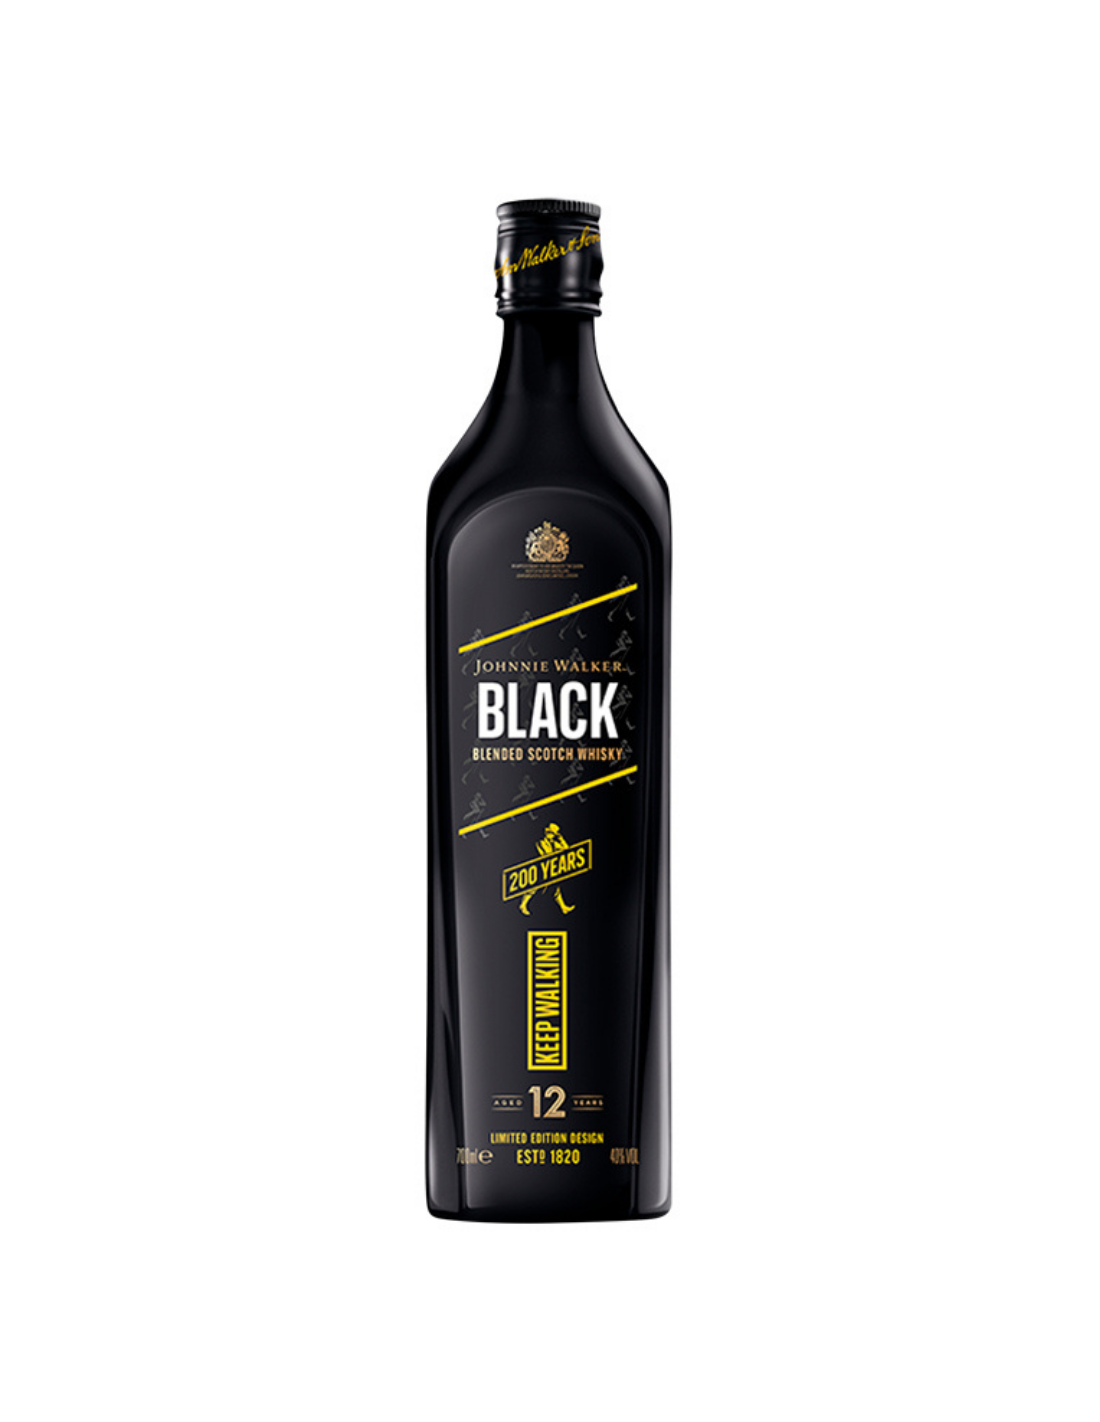 Whisky Johnnie Walker Icon Black 200 Years, 0.7L, 40% alc., Scotia alcooldiscount.ro